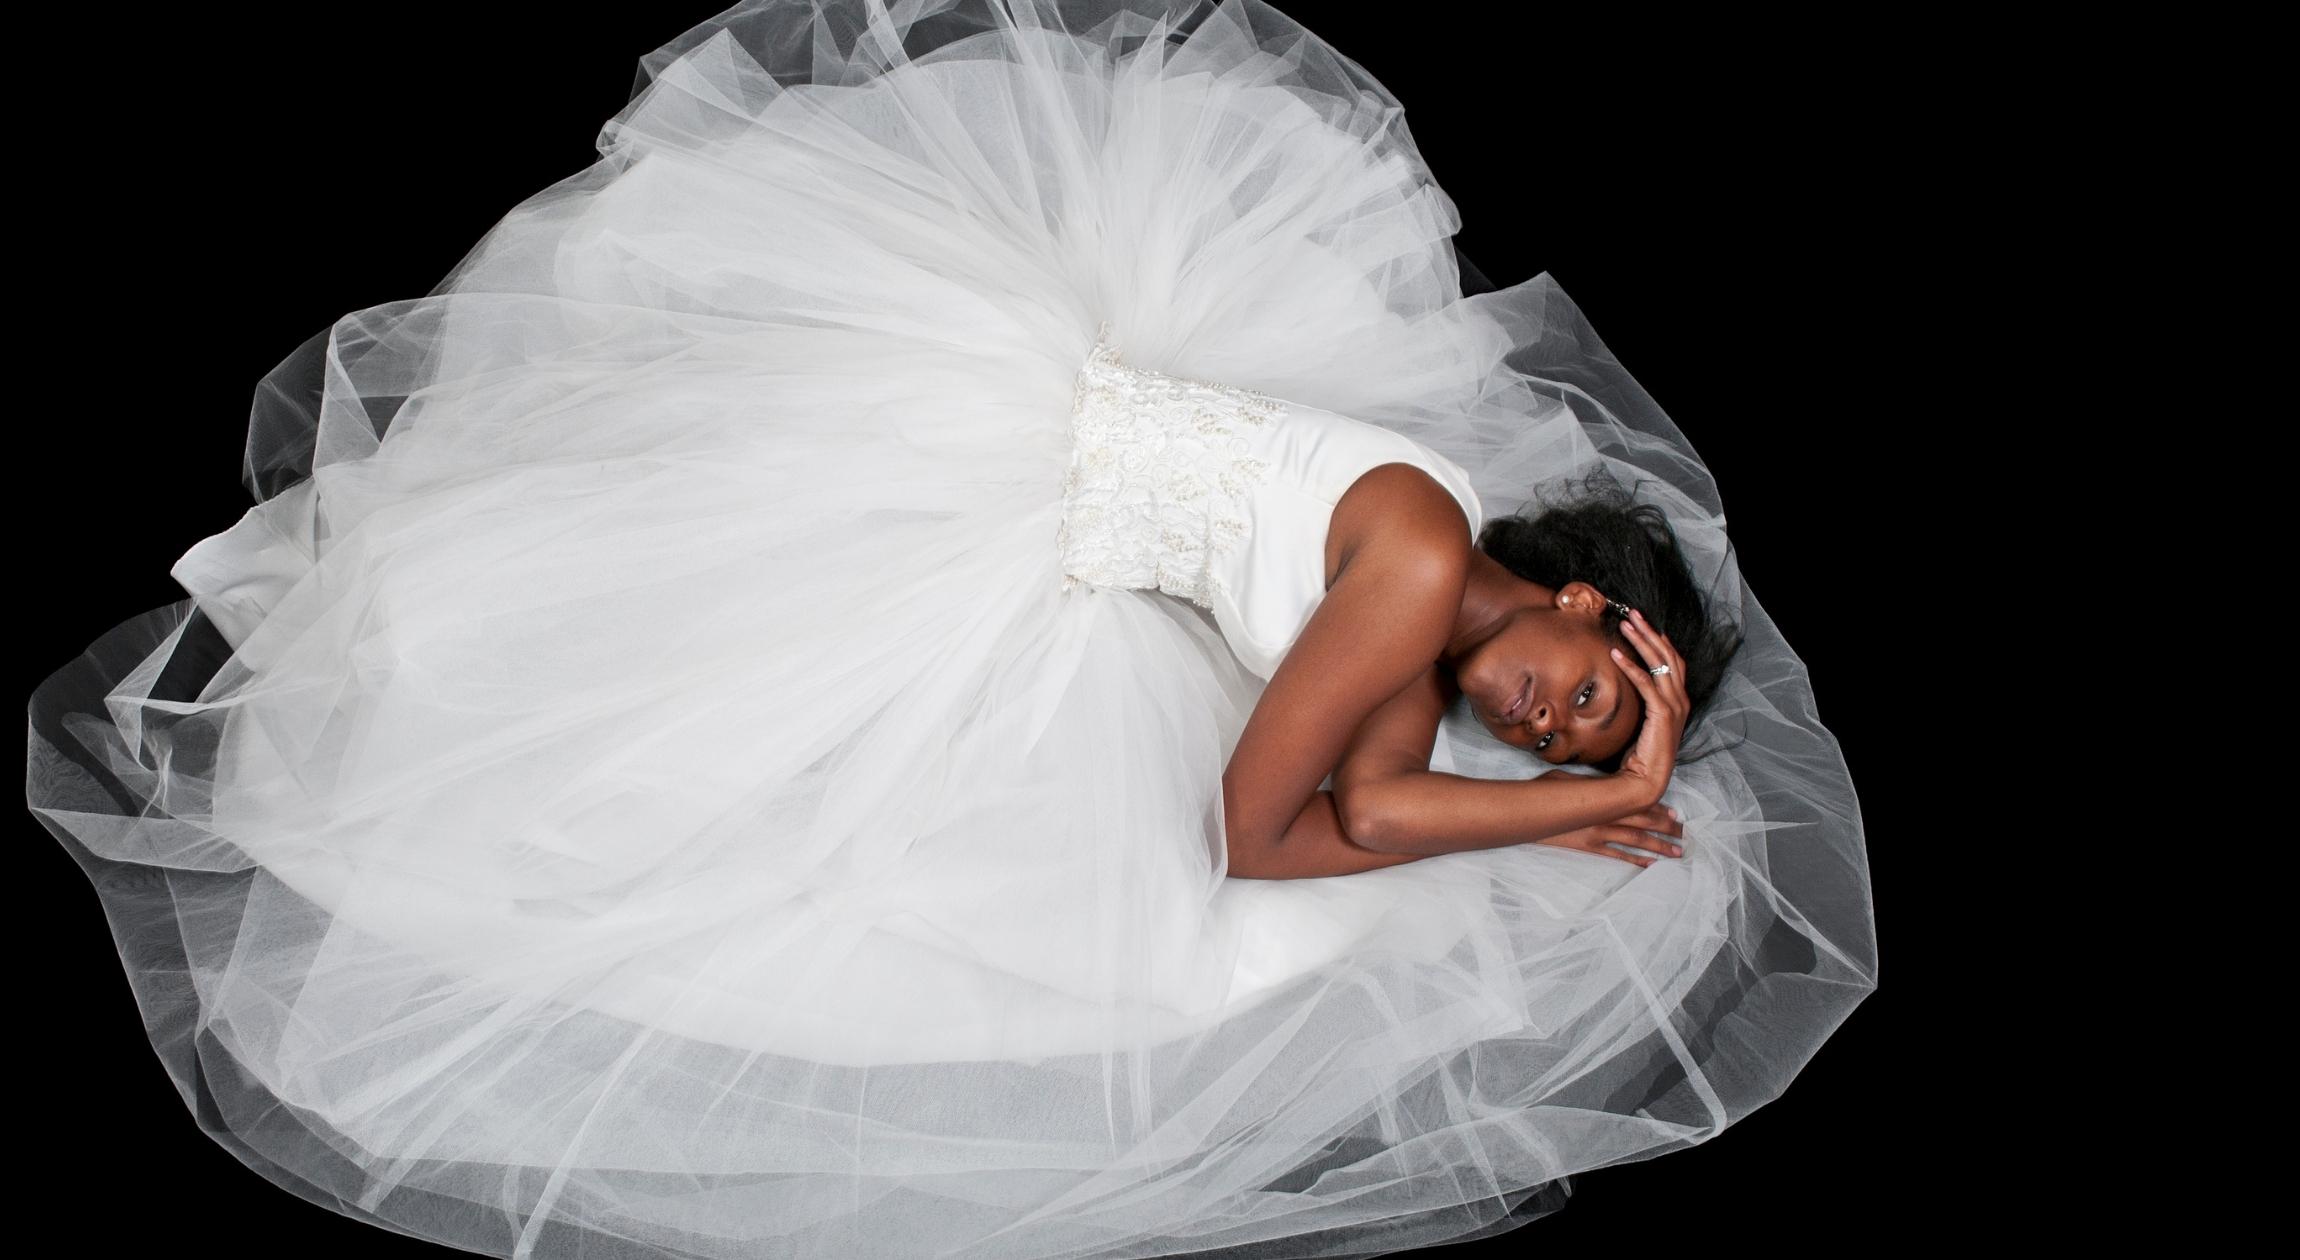 A Black woman in a white dress on the floor